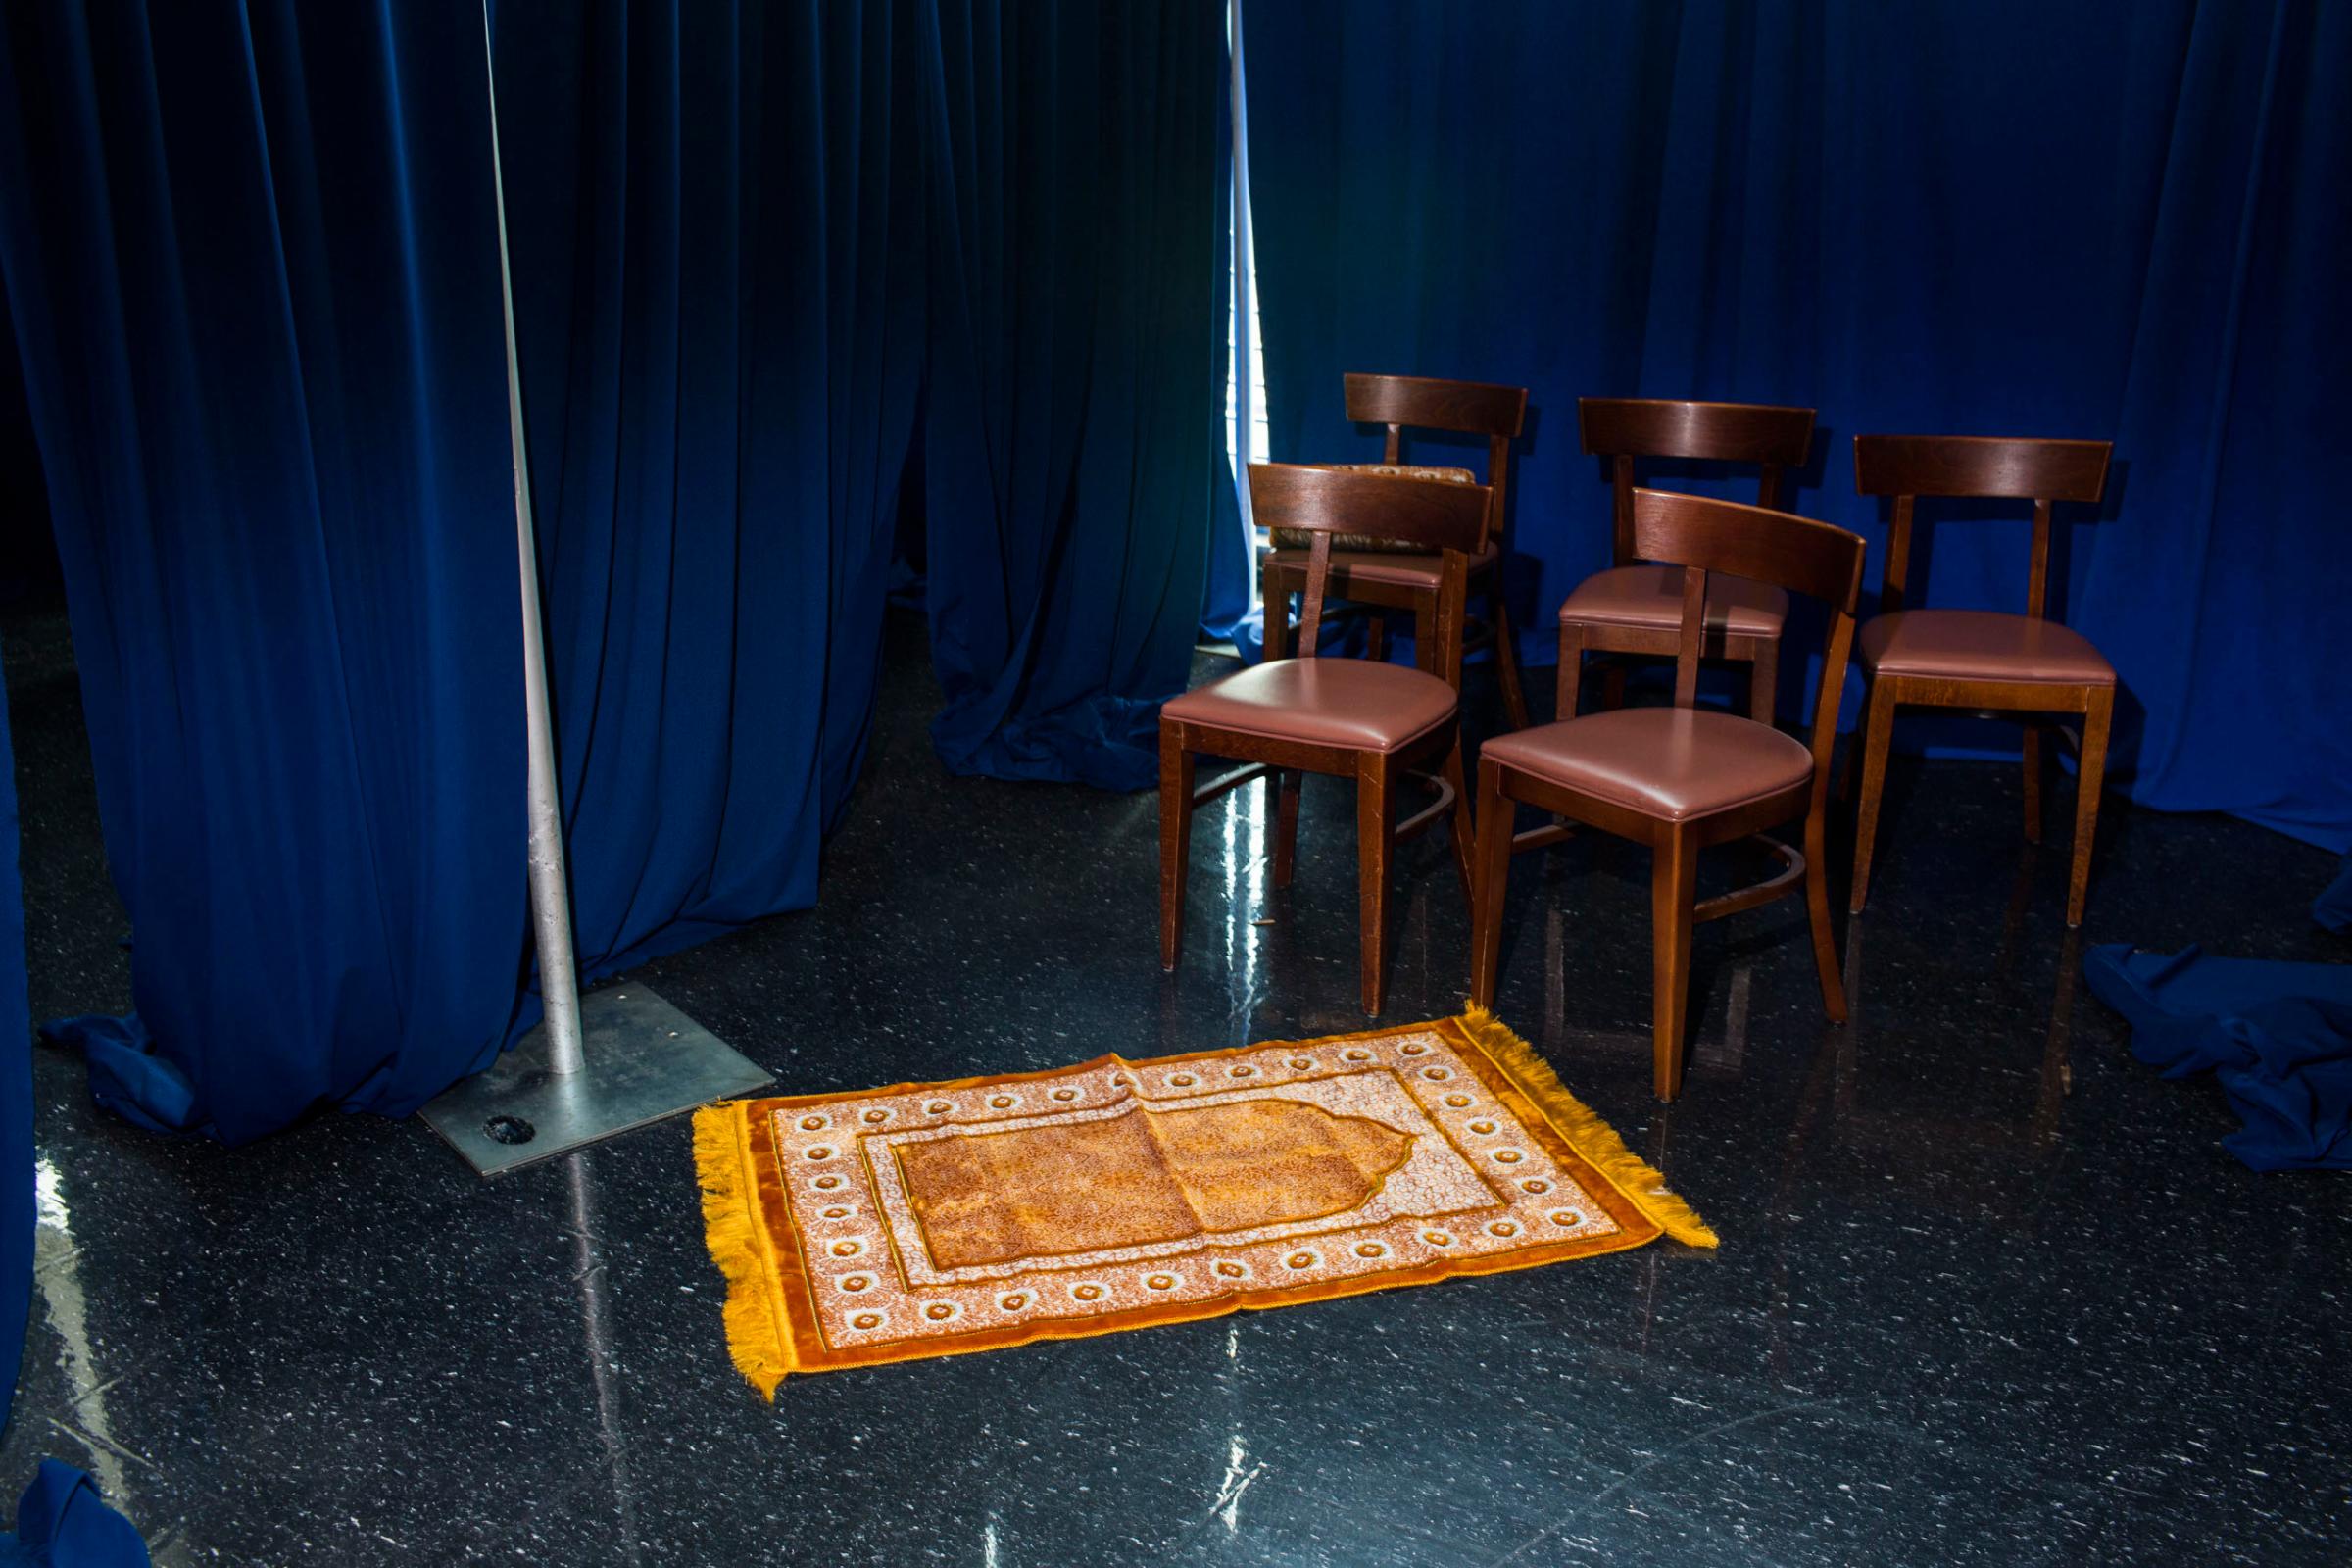 Interfaith Prayer Room at the 2016 Democratic National Convention in Philadelphia on Monday, July 25, 2016.